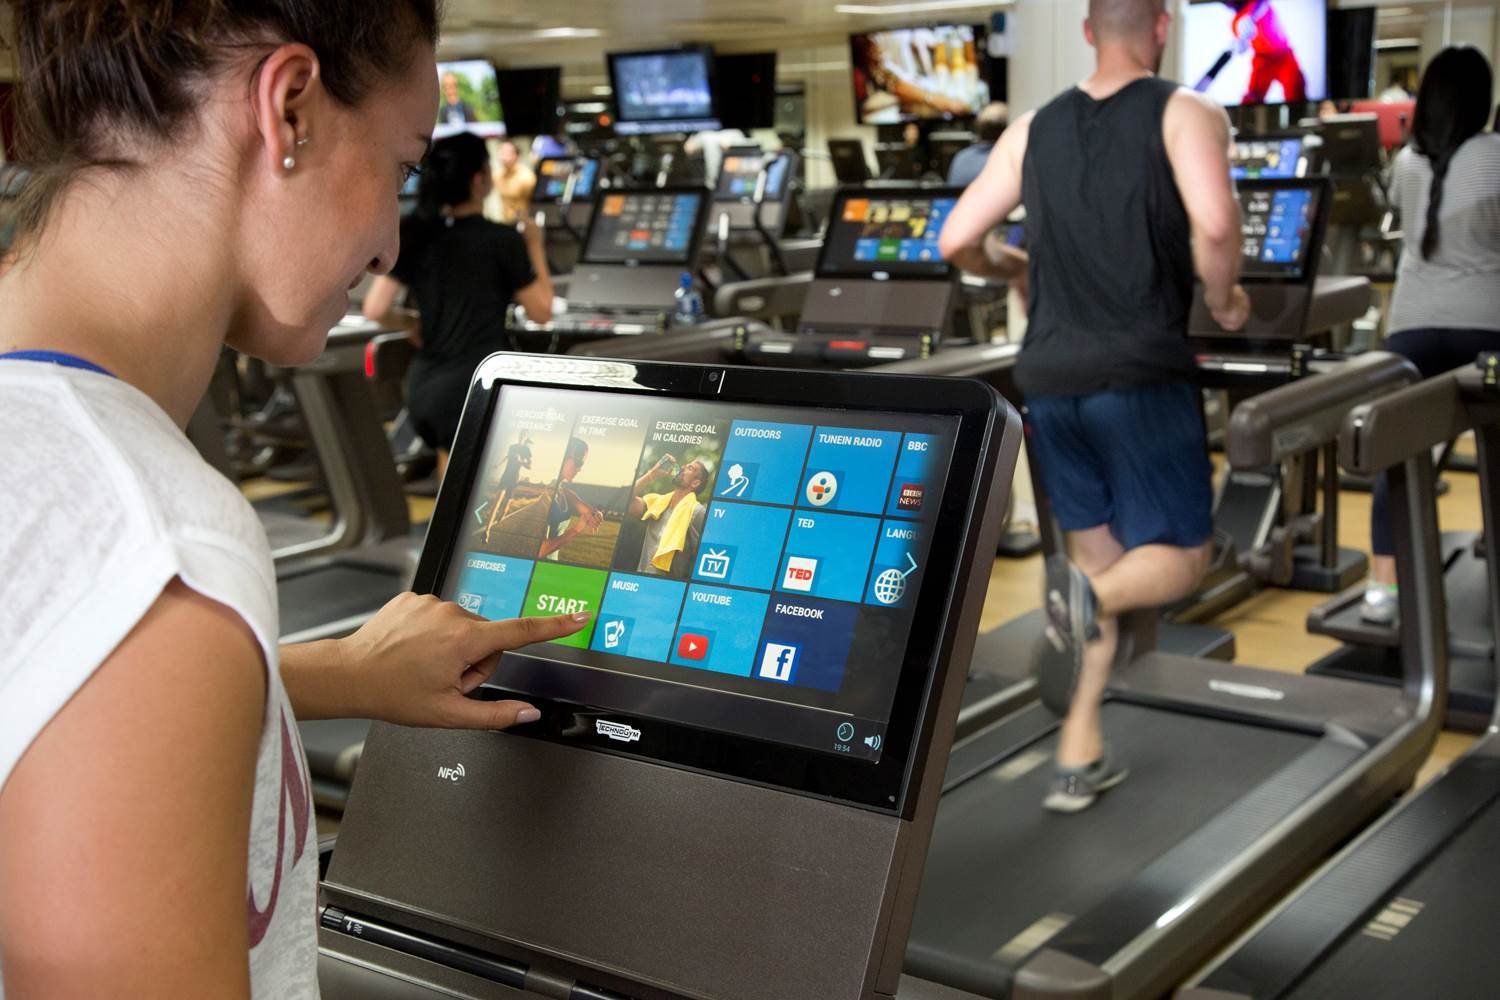 virgin active tech gyms opening soon members to get smartbands to track their workouts image 1